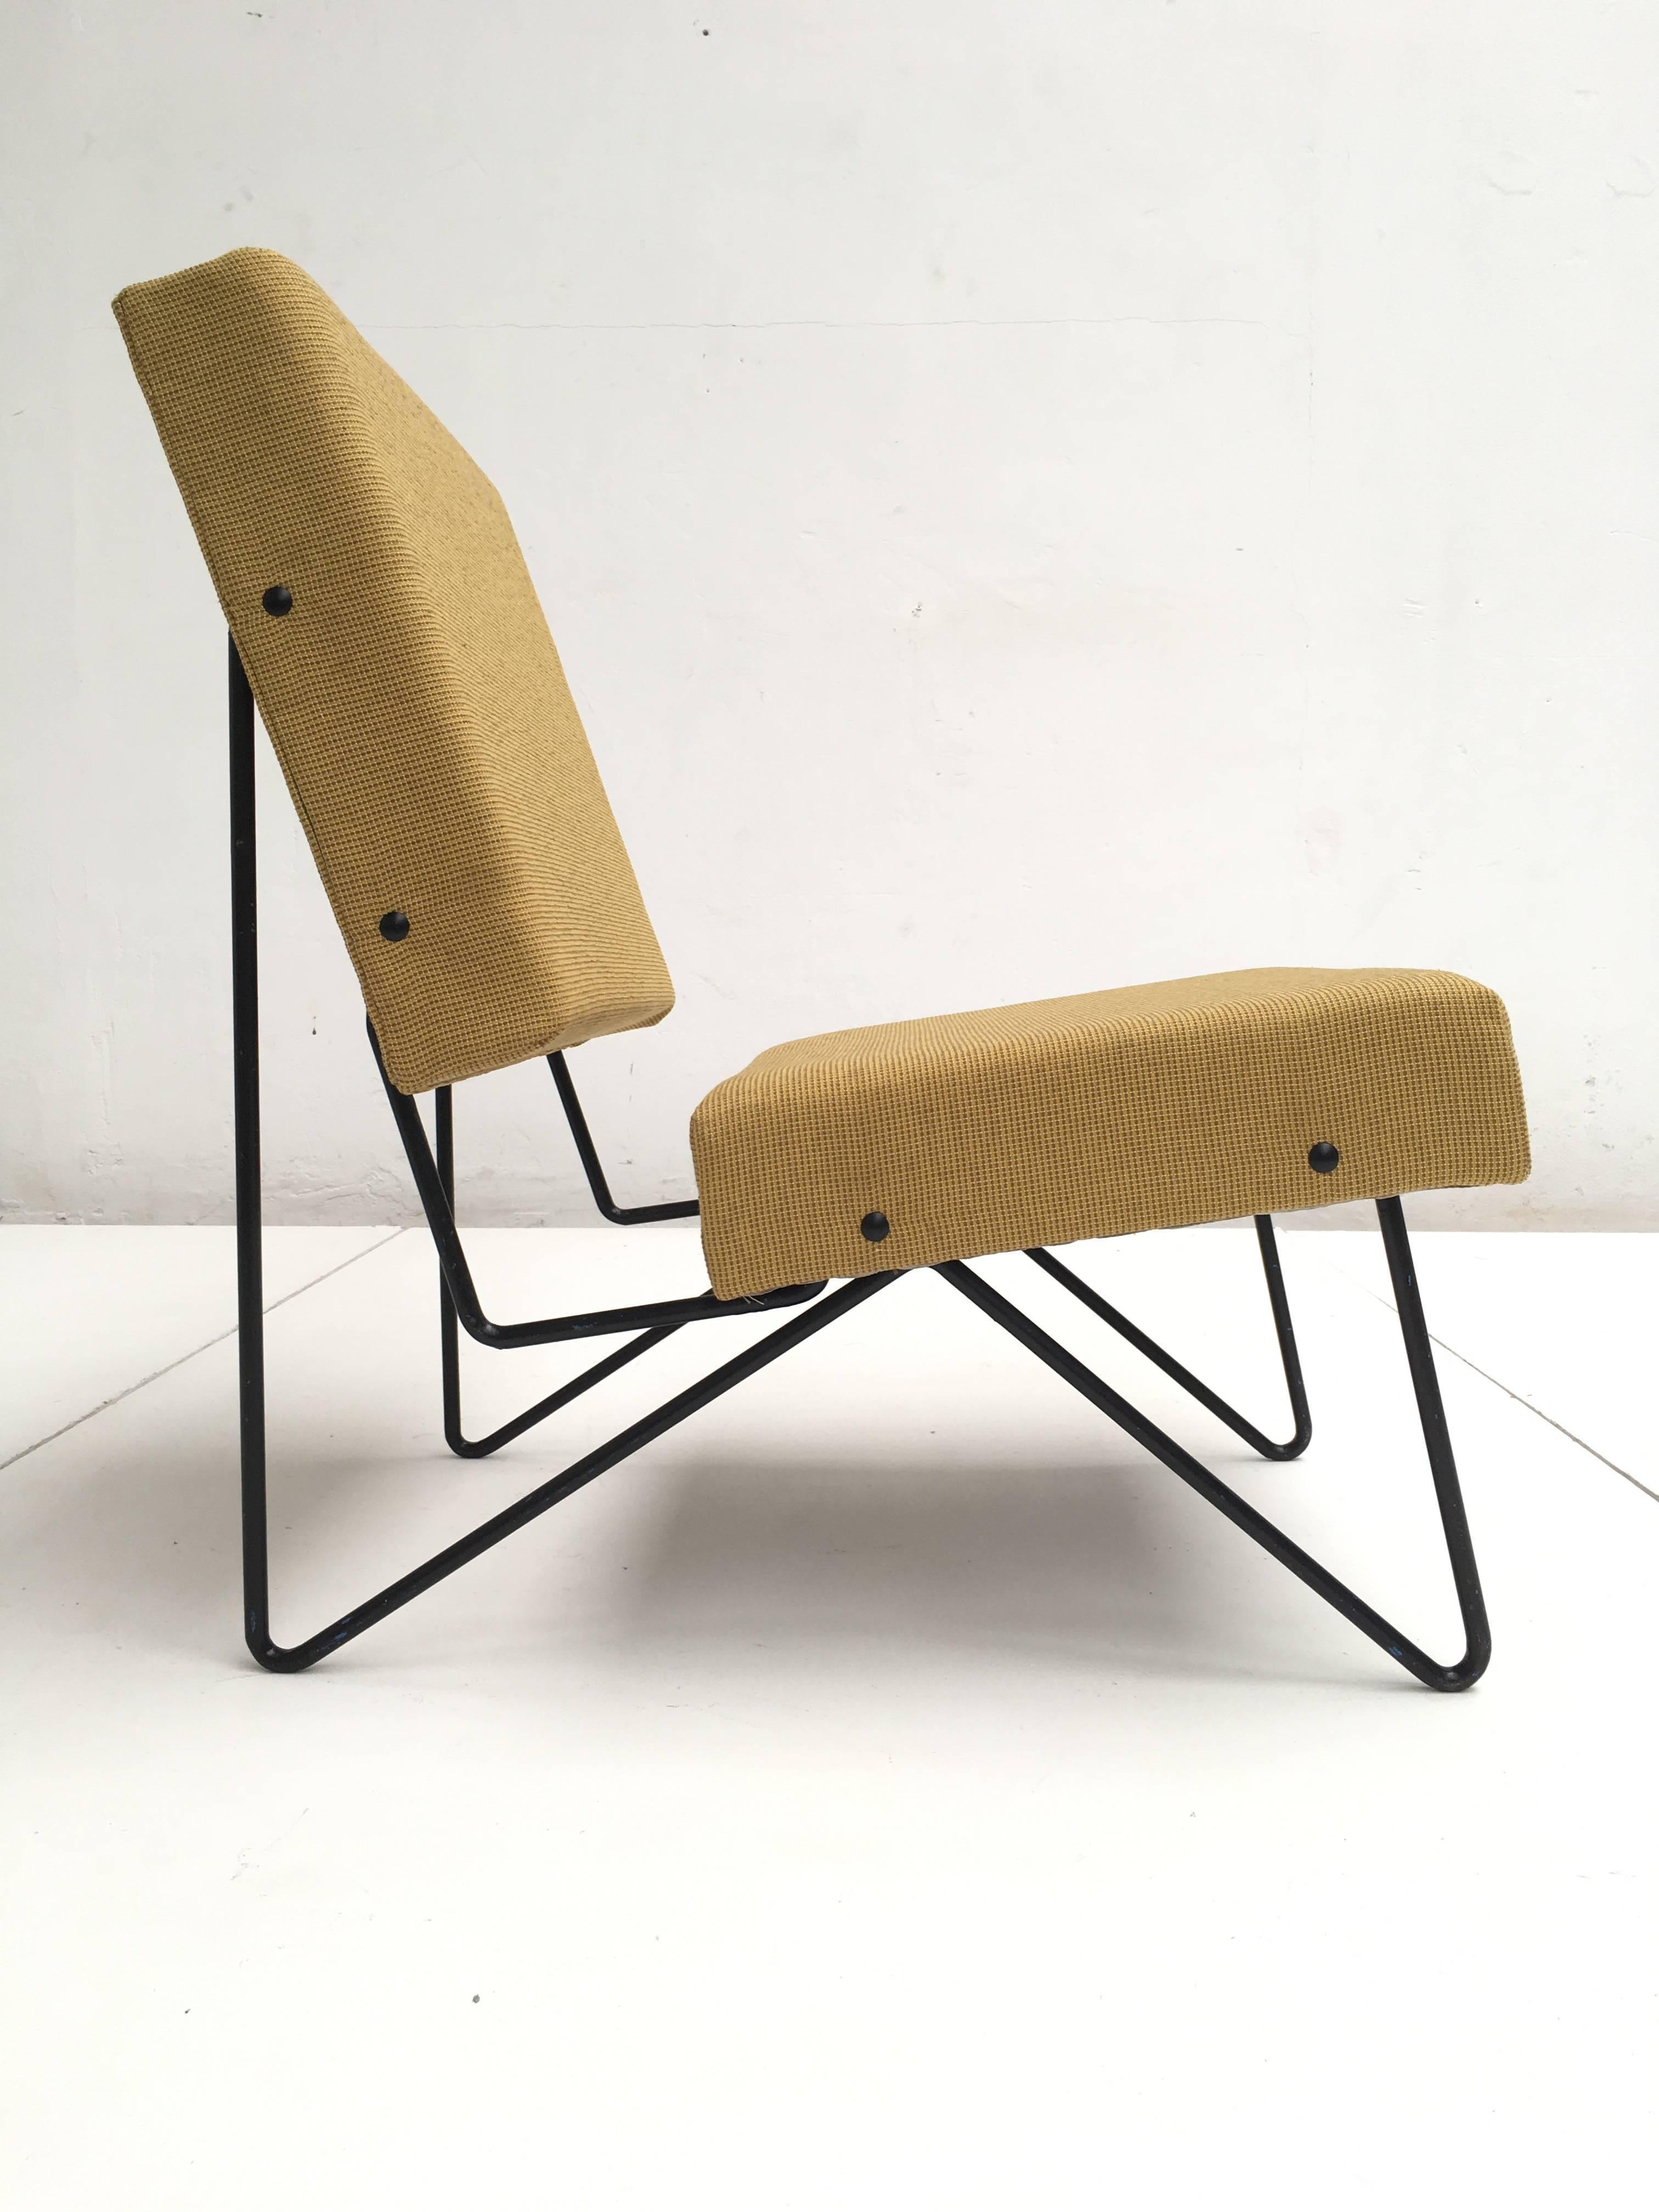 A rare icon of Dutch design history this FM03 Combex lounge chair by Cees Braakman for UMS Pastoe

Superb solid steel frame with birch plywood and upholstery

Fully restored with new Latex foam, Pirelli strapping and a De Ploeg upholstery with